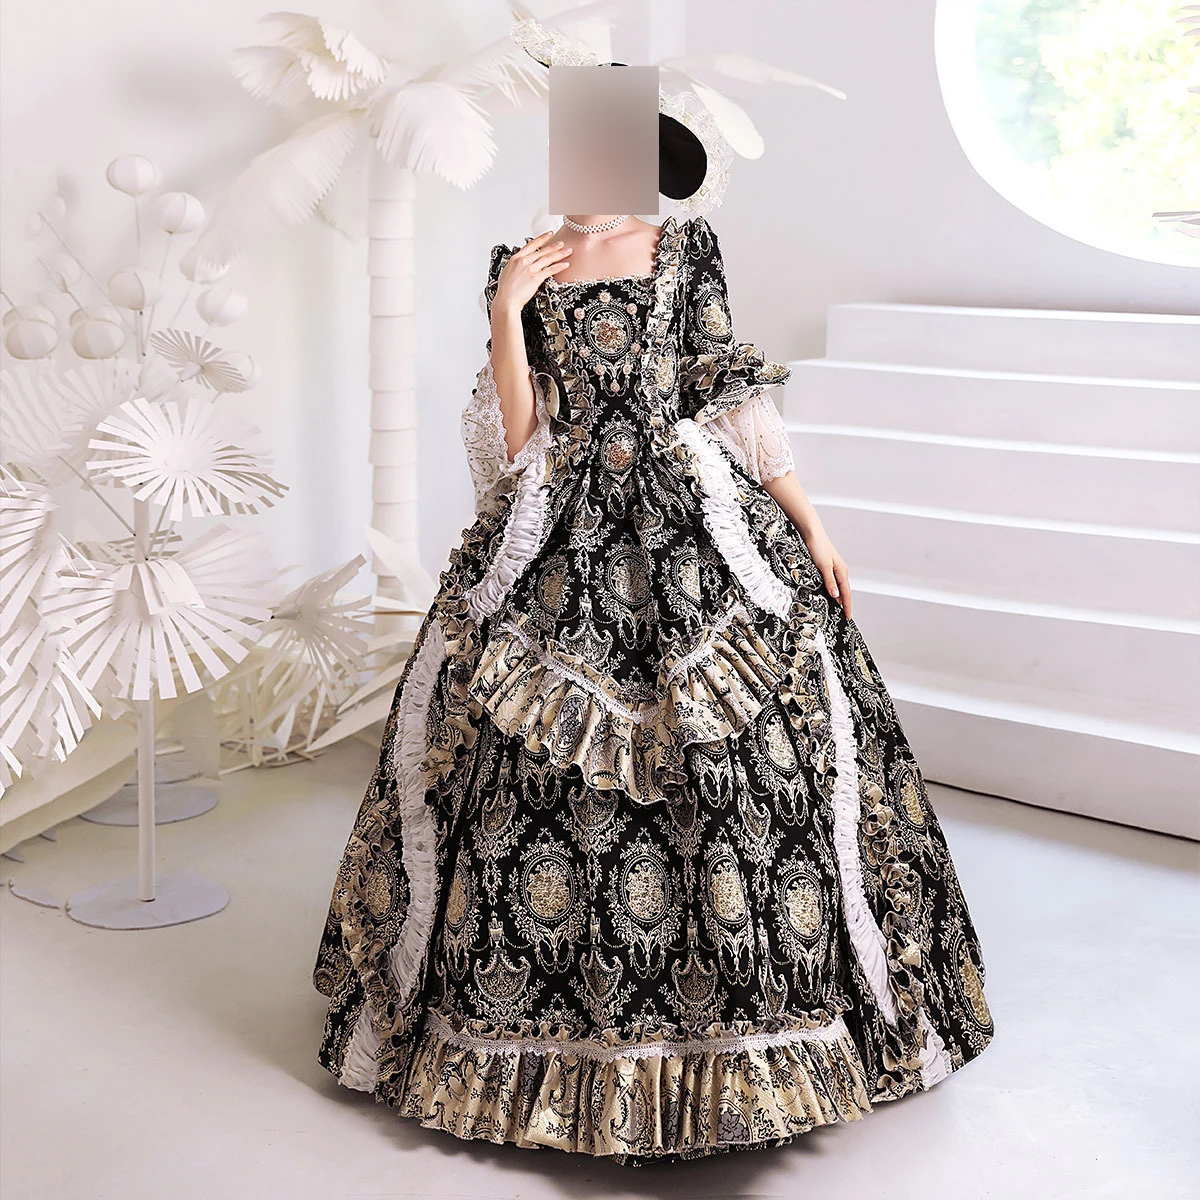 

High End Ball Gown Baroque 18th Medieval Women Evening Dresses Renaissance Victorian Prom Party Birthday Masquerade Theater Gown